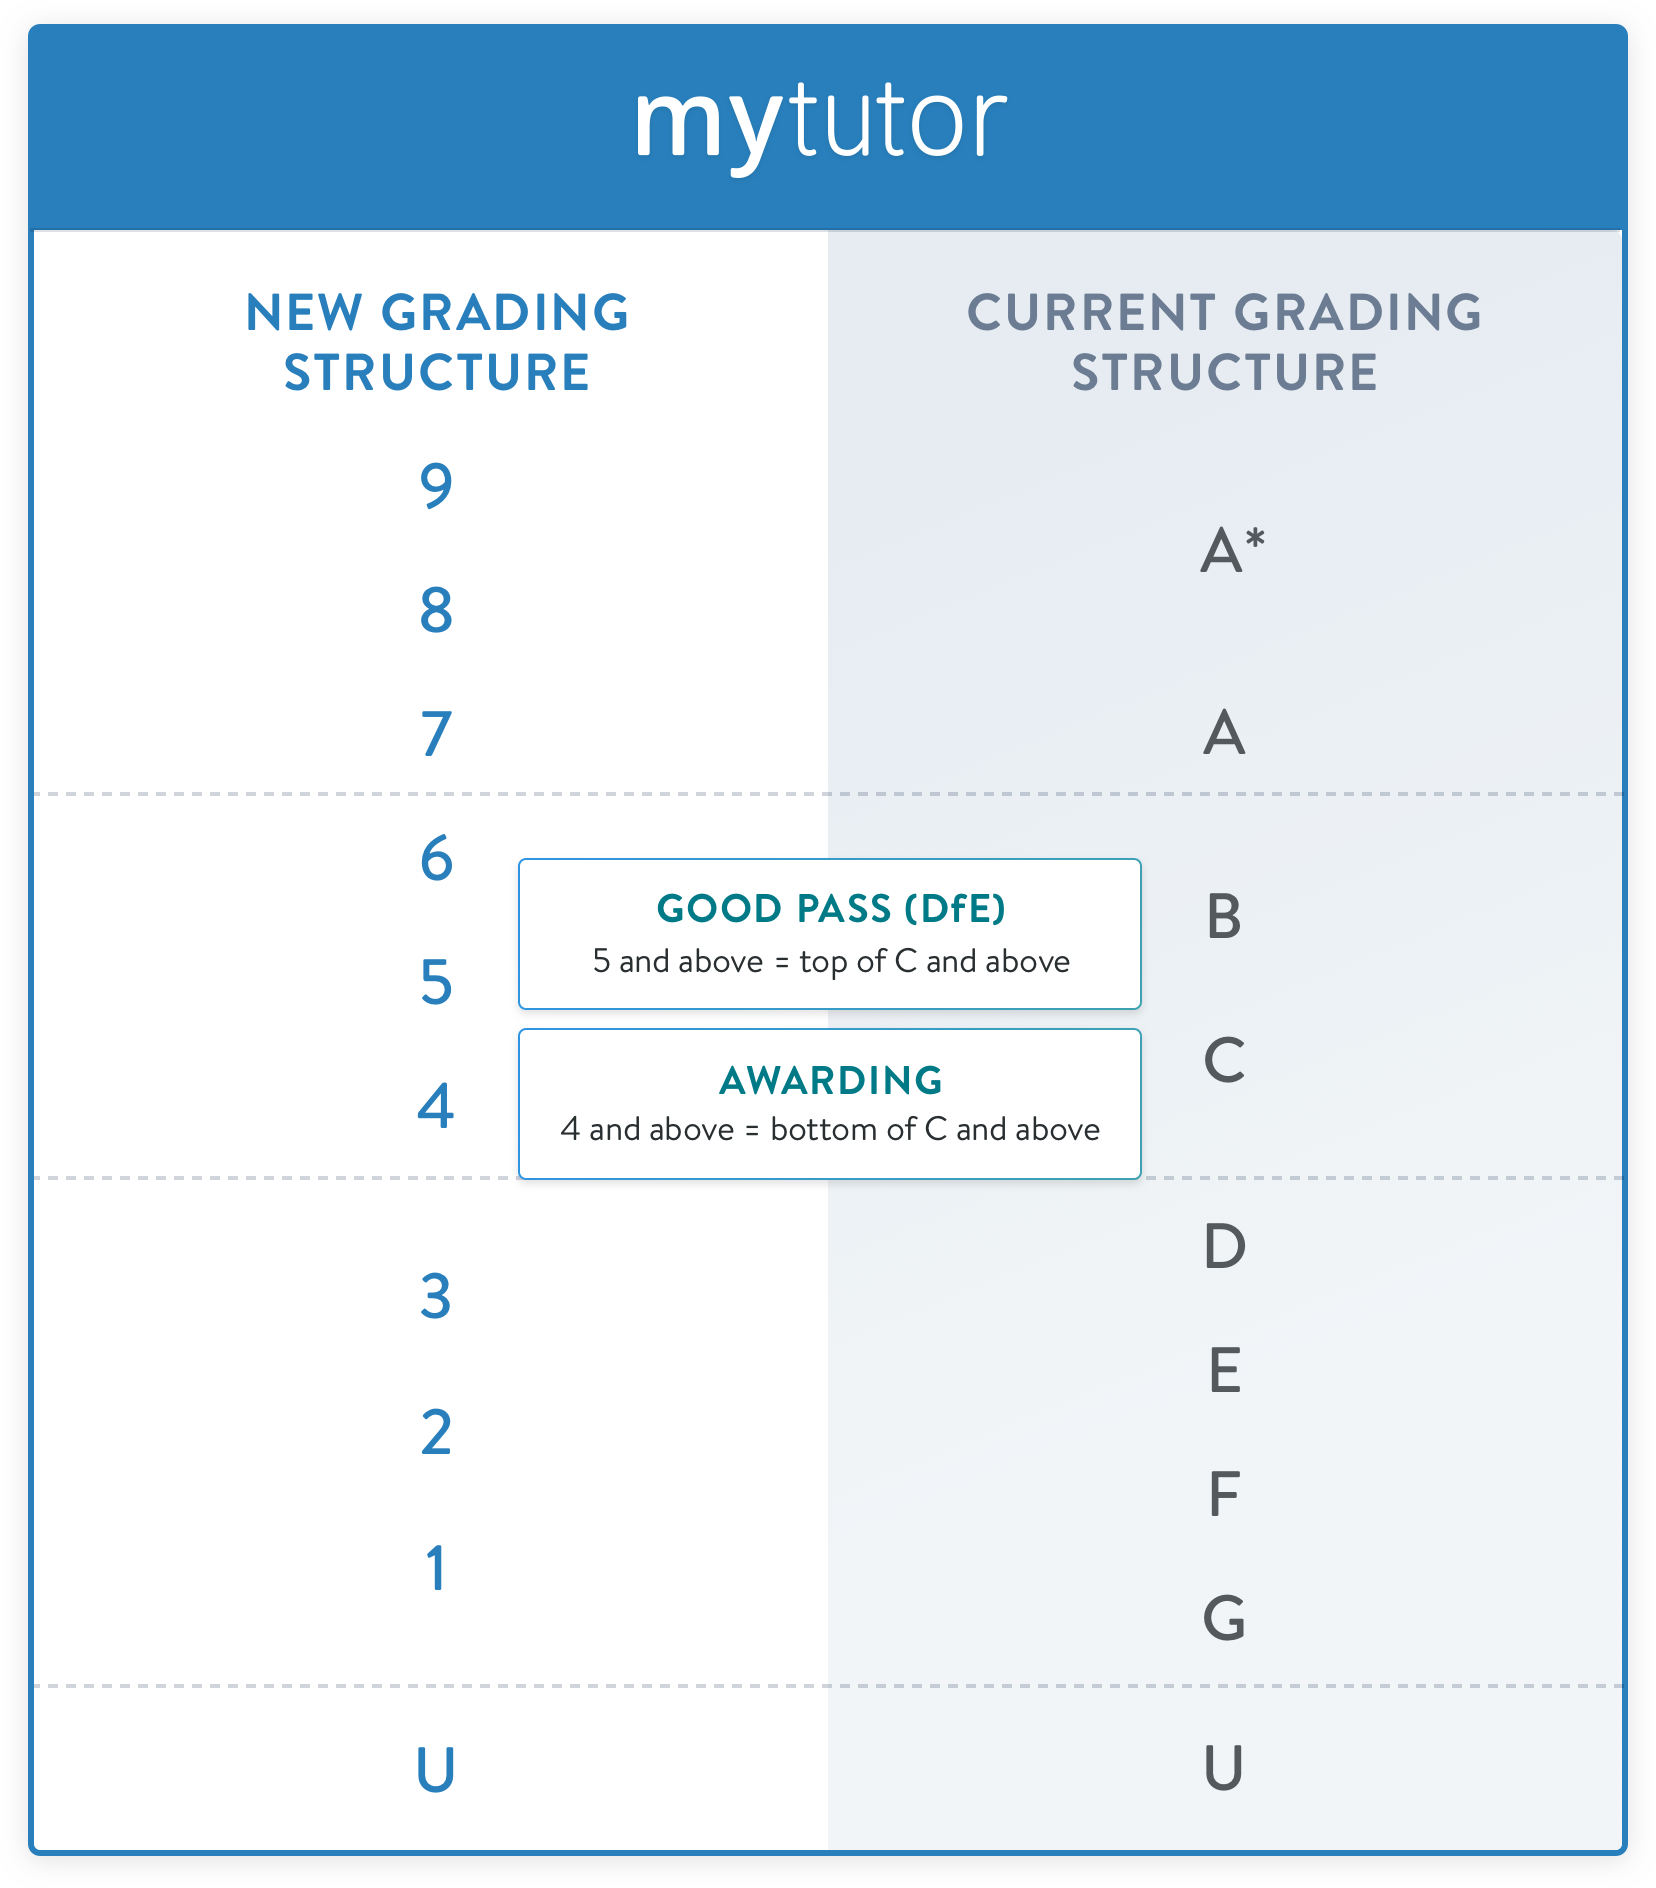 GCSE Grading System: Everything You Need to Know